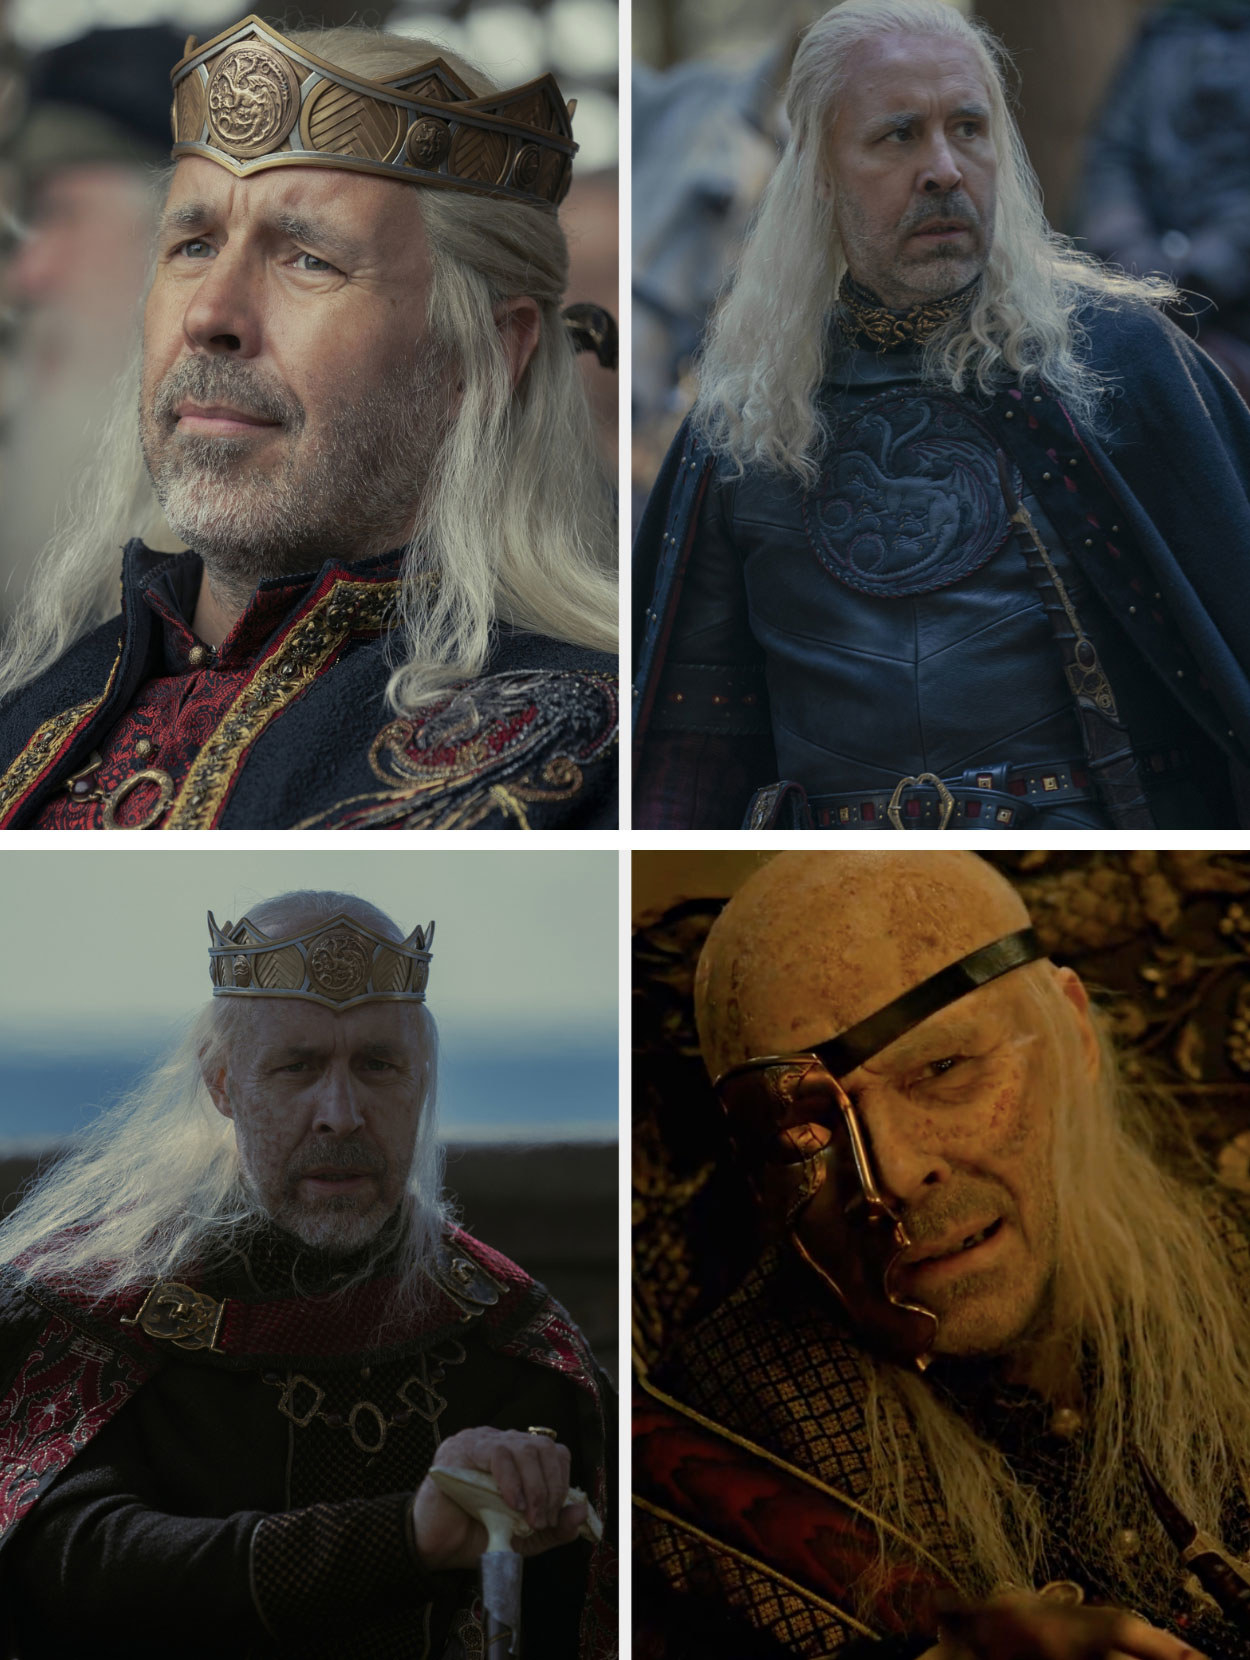 Viserys at four stages in his life, with an increasing amount of visible signs of ill health and age